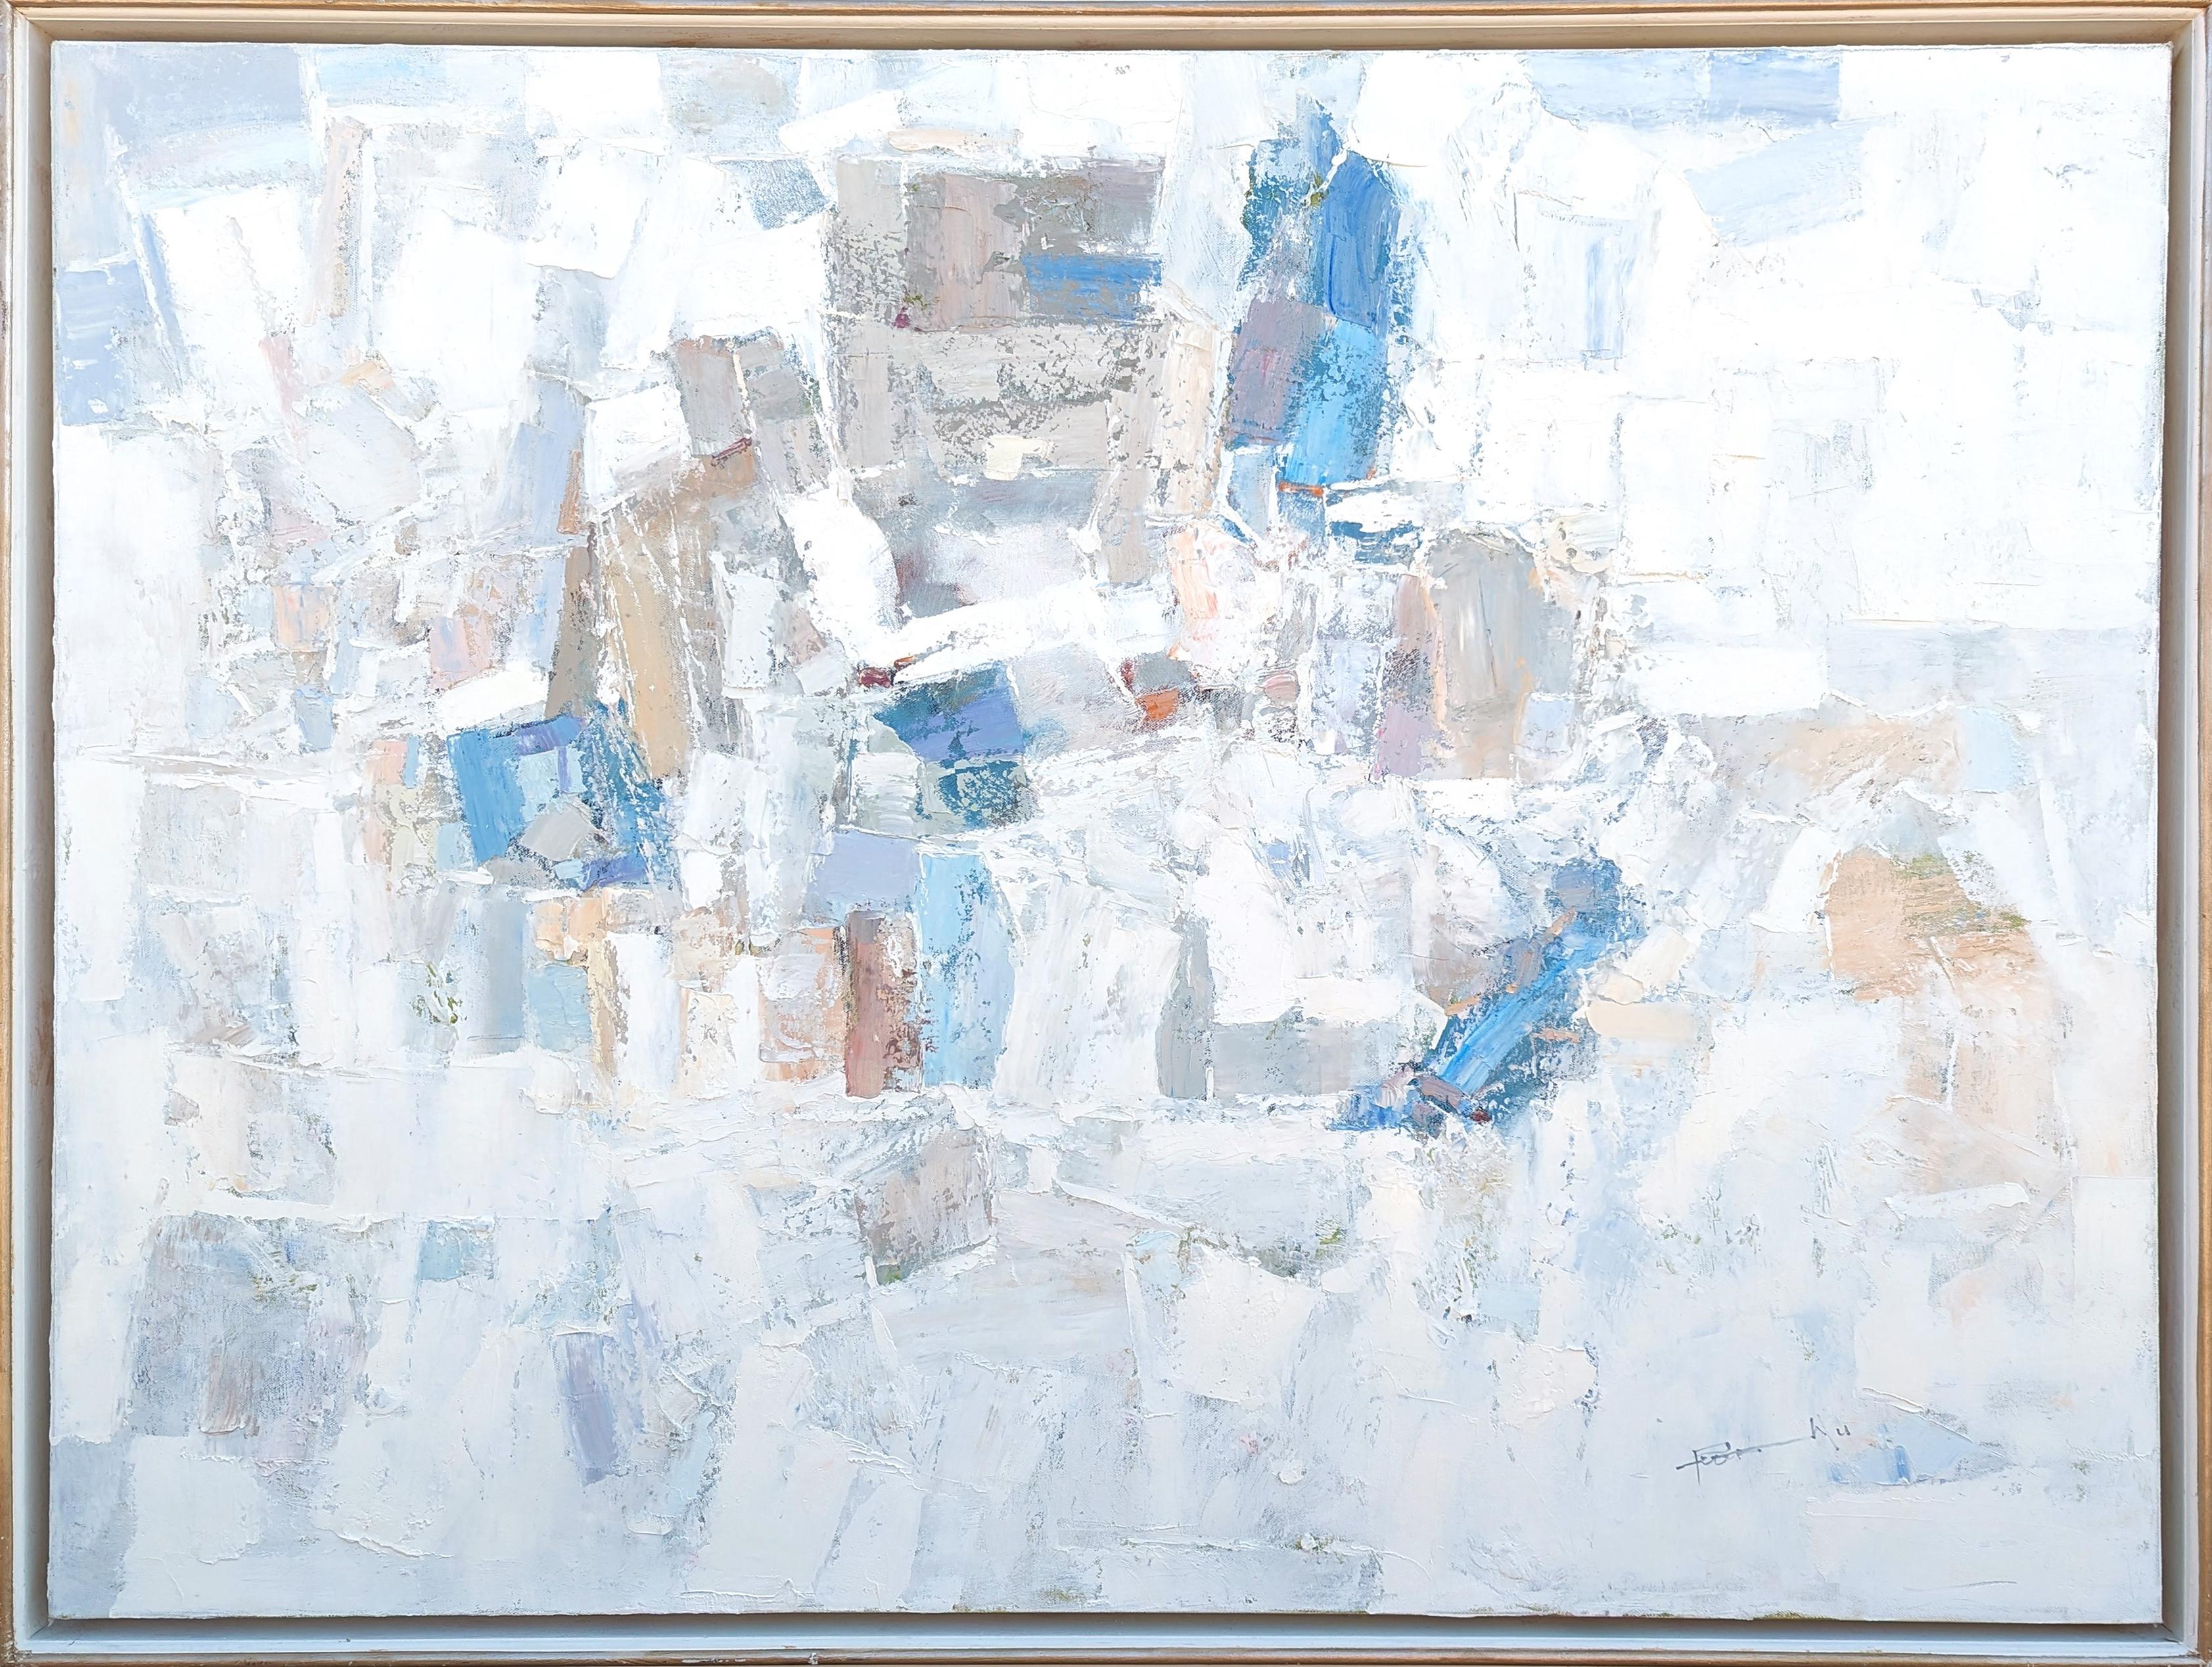 Pastel toned abstract painting by Texas-based artist Peter Wu. The work features light blue and peach toned gestural strokes against a white background. Signed in the front lower right corner as well as titled, signed, and dated by artist on the